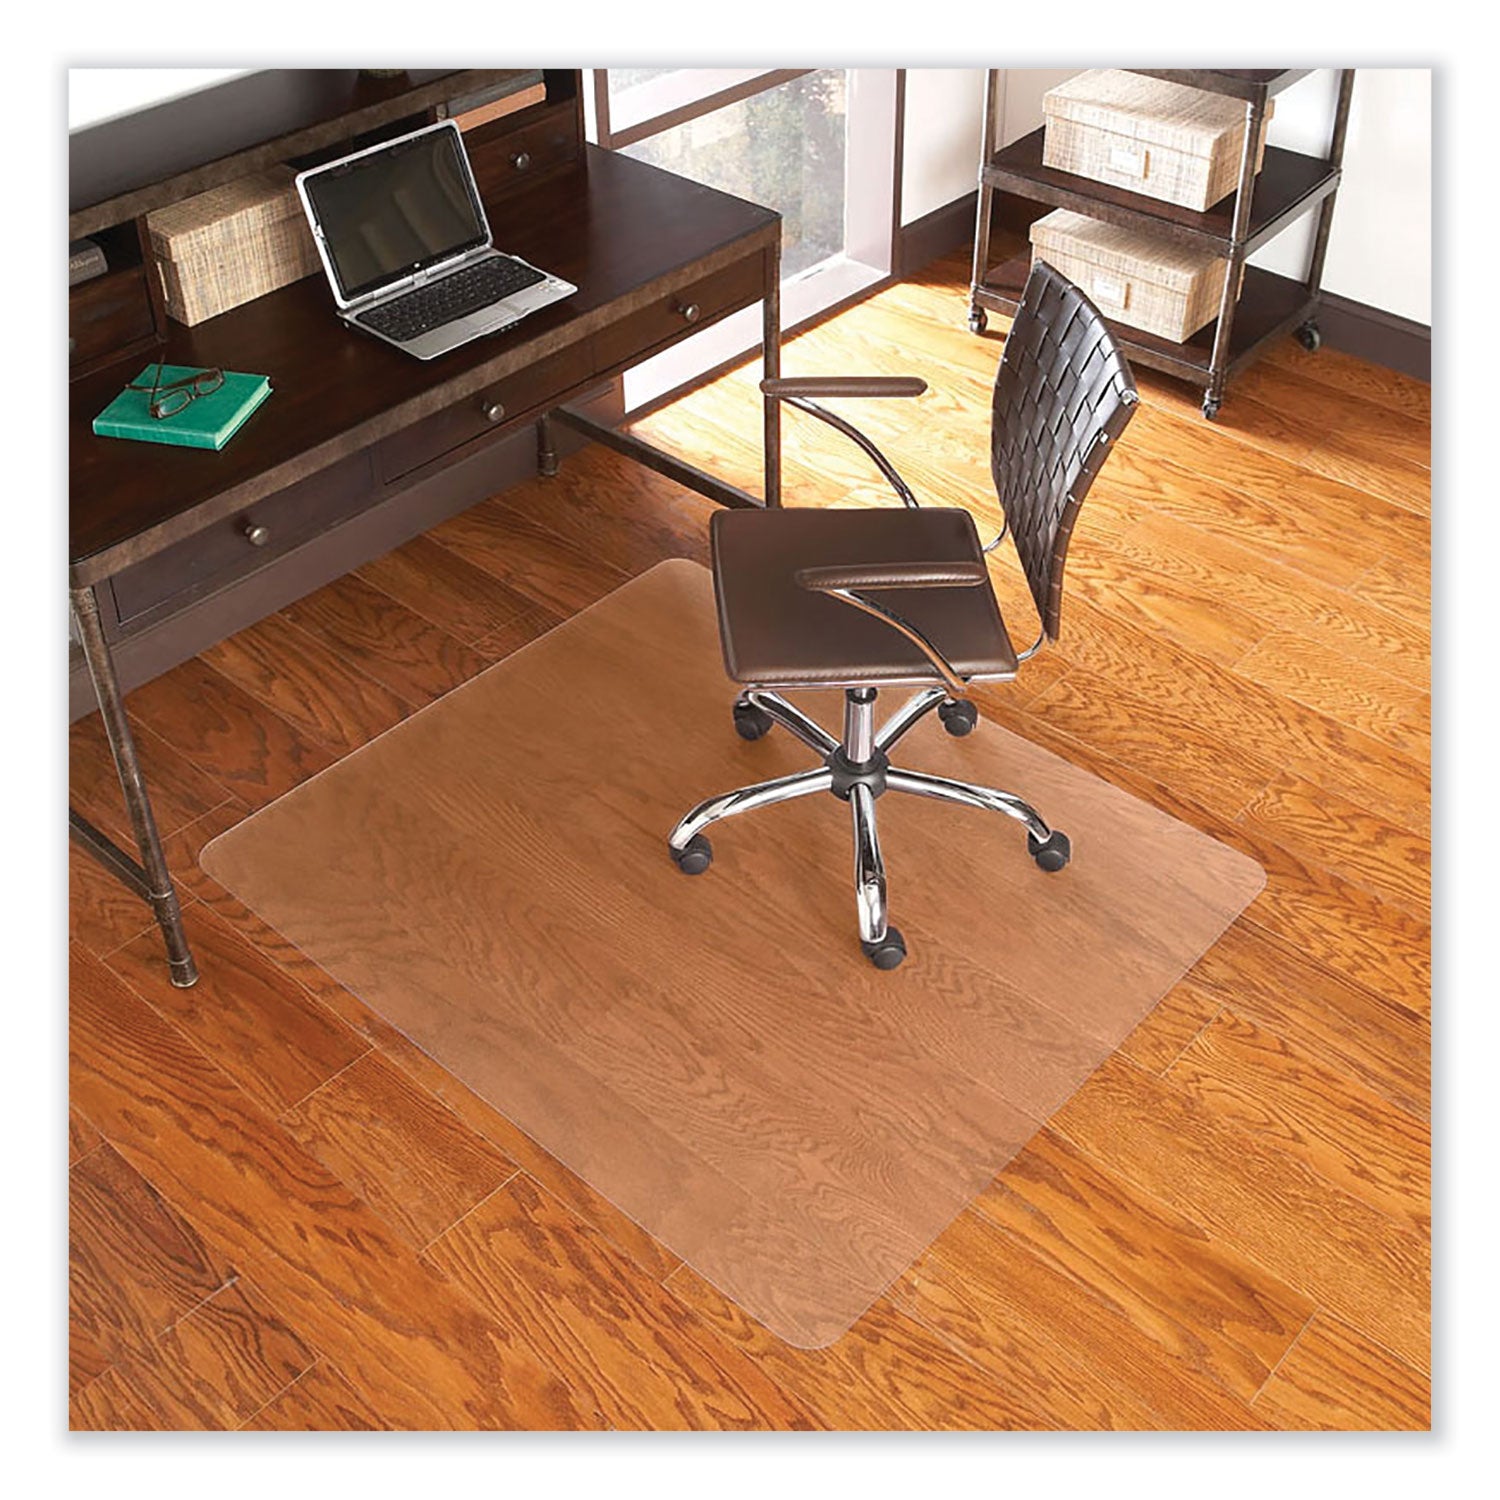 everlife-chair-mat-for-hard-floors-heavy-use-rectangular-36-x-48-clear-ships-in-4-6-business-days_esr132031 - 4